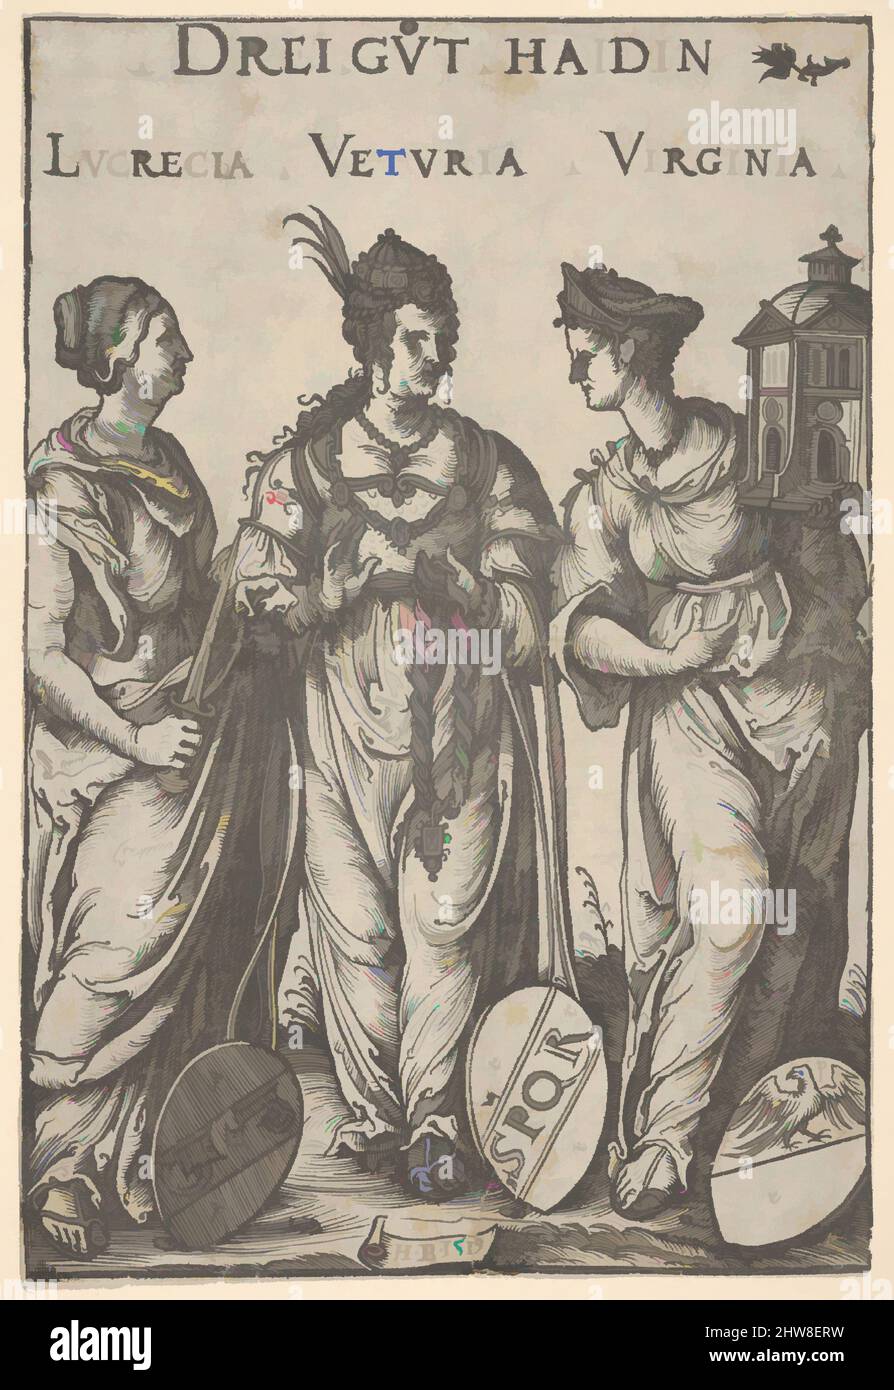 Art inspired by The Three Heathen Heroines (Drei Gut Haidin), from Heroes and Heroines, 1519, Woodcut; first state of three, Sheet: 7 5/8 × 5 3/16 in. (19.3 × 13.1 cm), Prints, Hans Burgkmair (German, Augsburg 1473–1531 Augsburg), Block cut by Jost de Negker (1480–1546), Standing, from, Classic works modernized by Artotop with a splash of modernity. Shapes, color and value, eye-catching visual impact on art. Emotions through freedom of artworks in a contemporary way. A timeless message pursuing a wildly creative new direction. Artists turning to the digital medium and creating the Artotop NFT Stock Photo